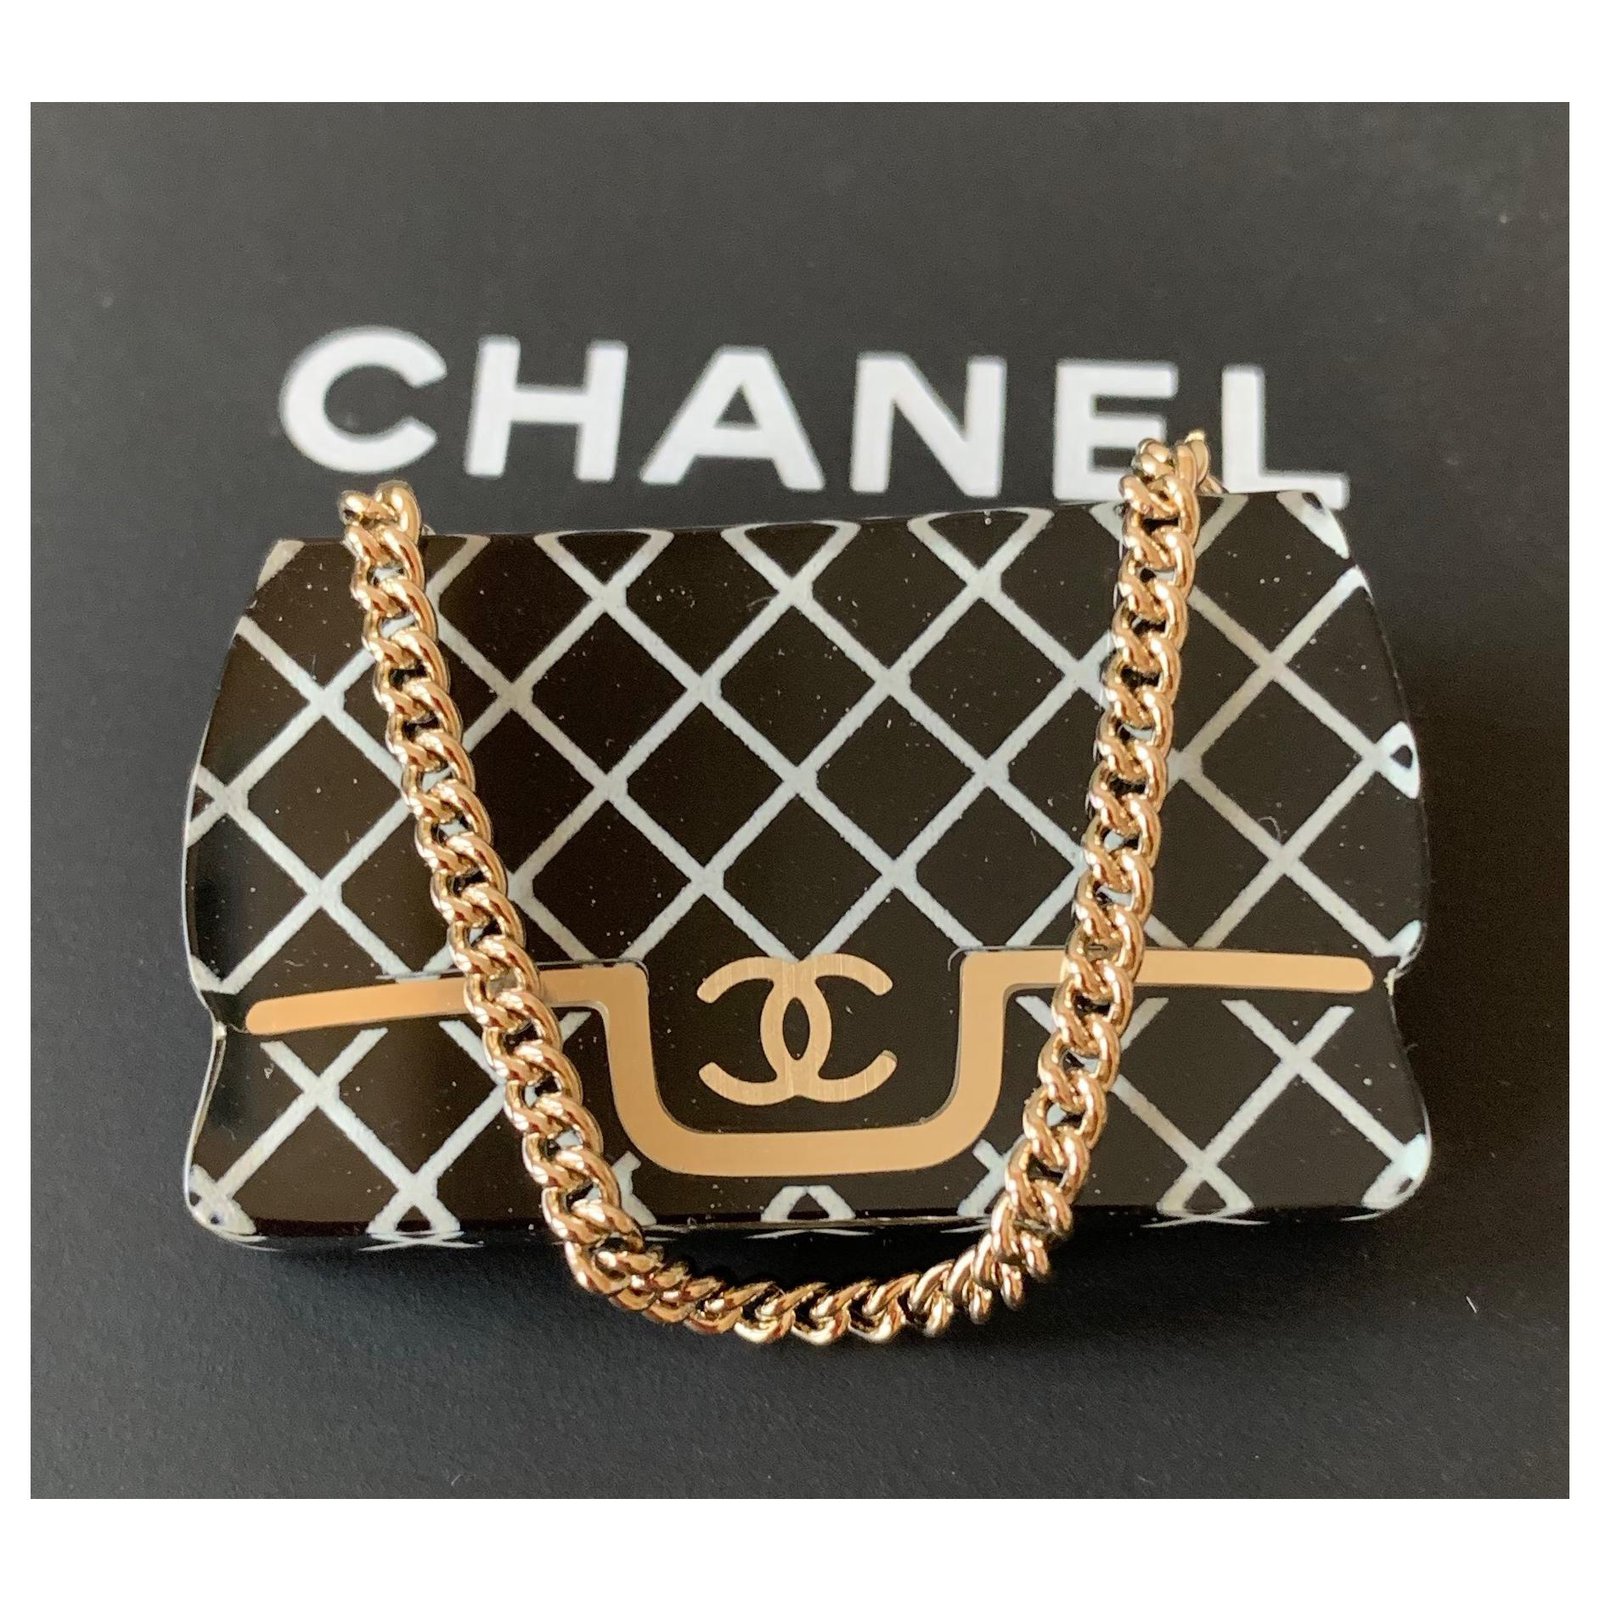 Chanel Black/white/gold Resin Classic Flap Bag Brooch Pin